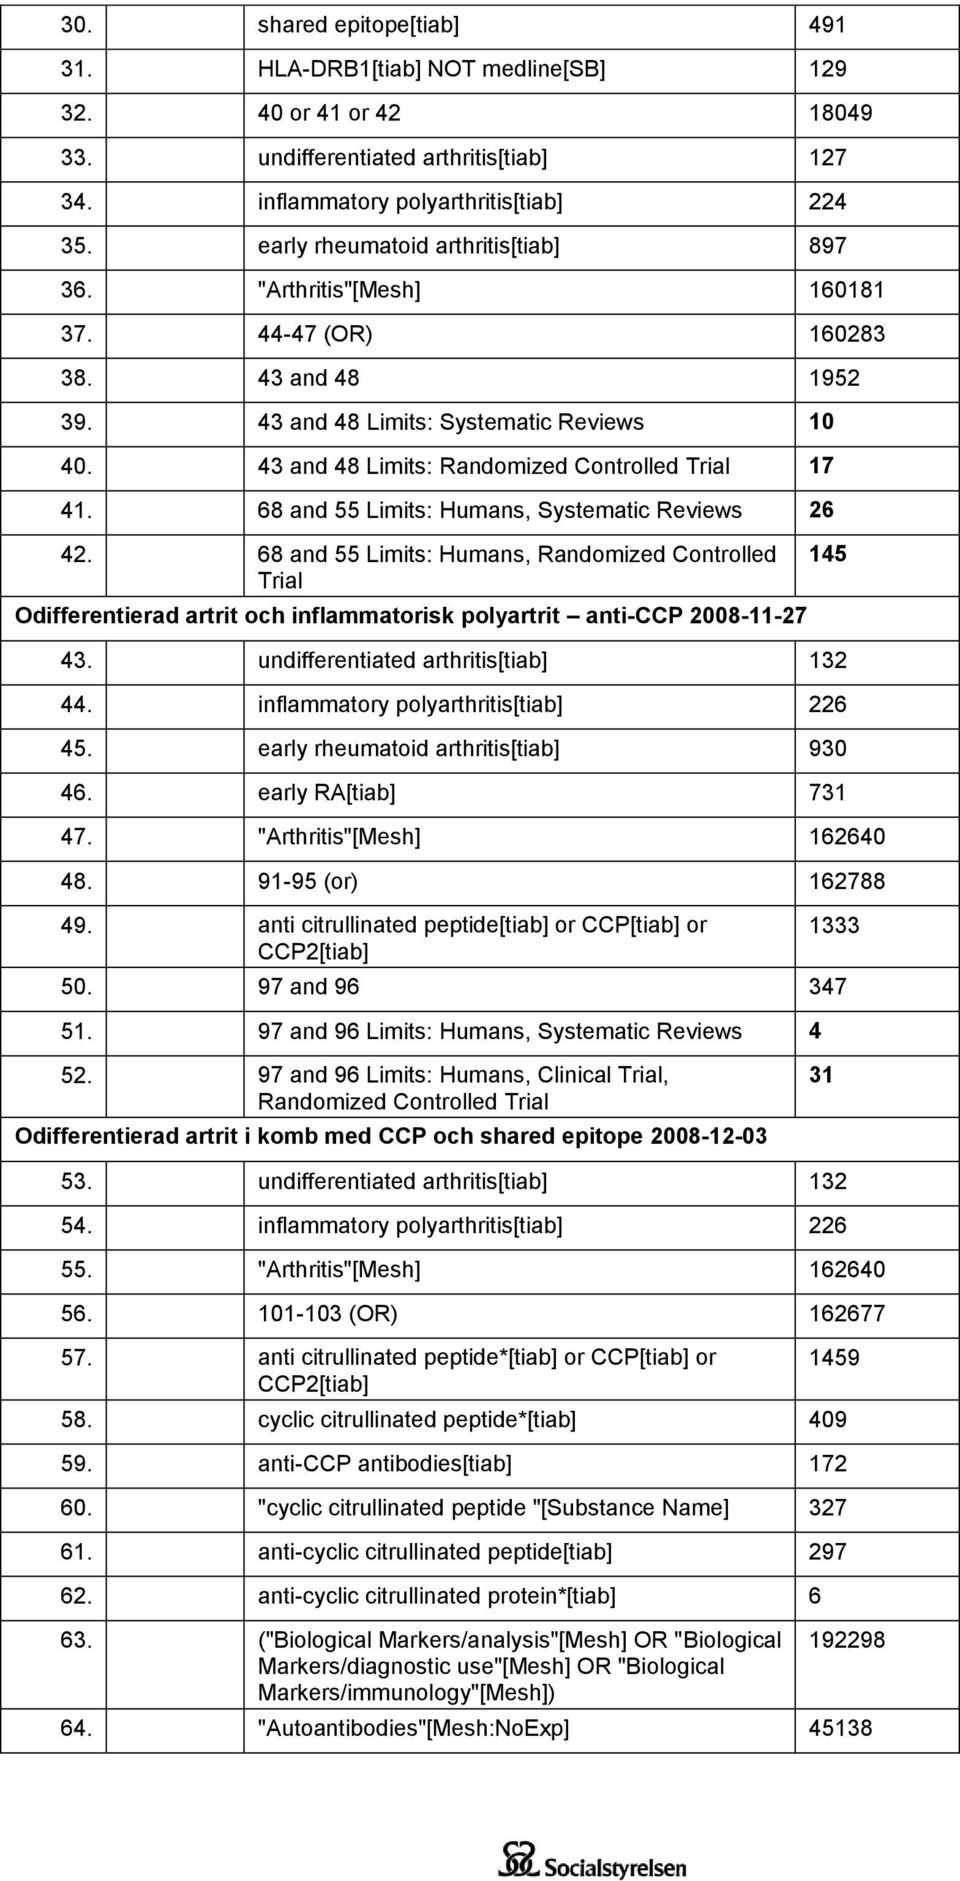 43 and 48 Limits: Randomized Controlled Trial 17 41. 68 and 55 Limits: Humans, Systematic Reviews 26 42.